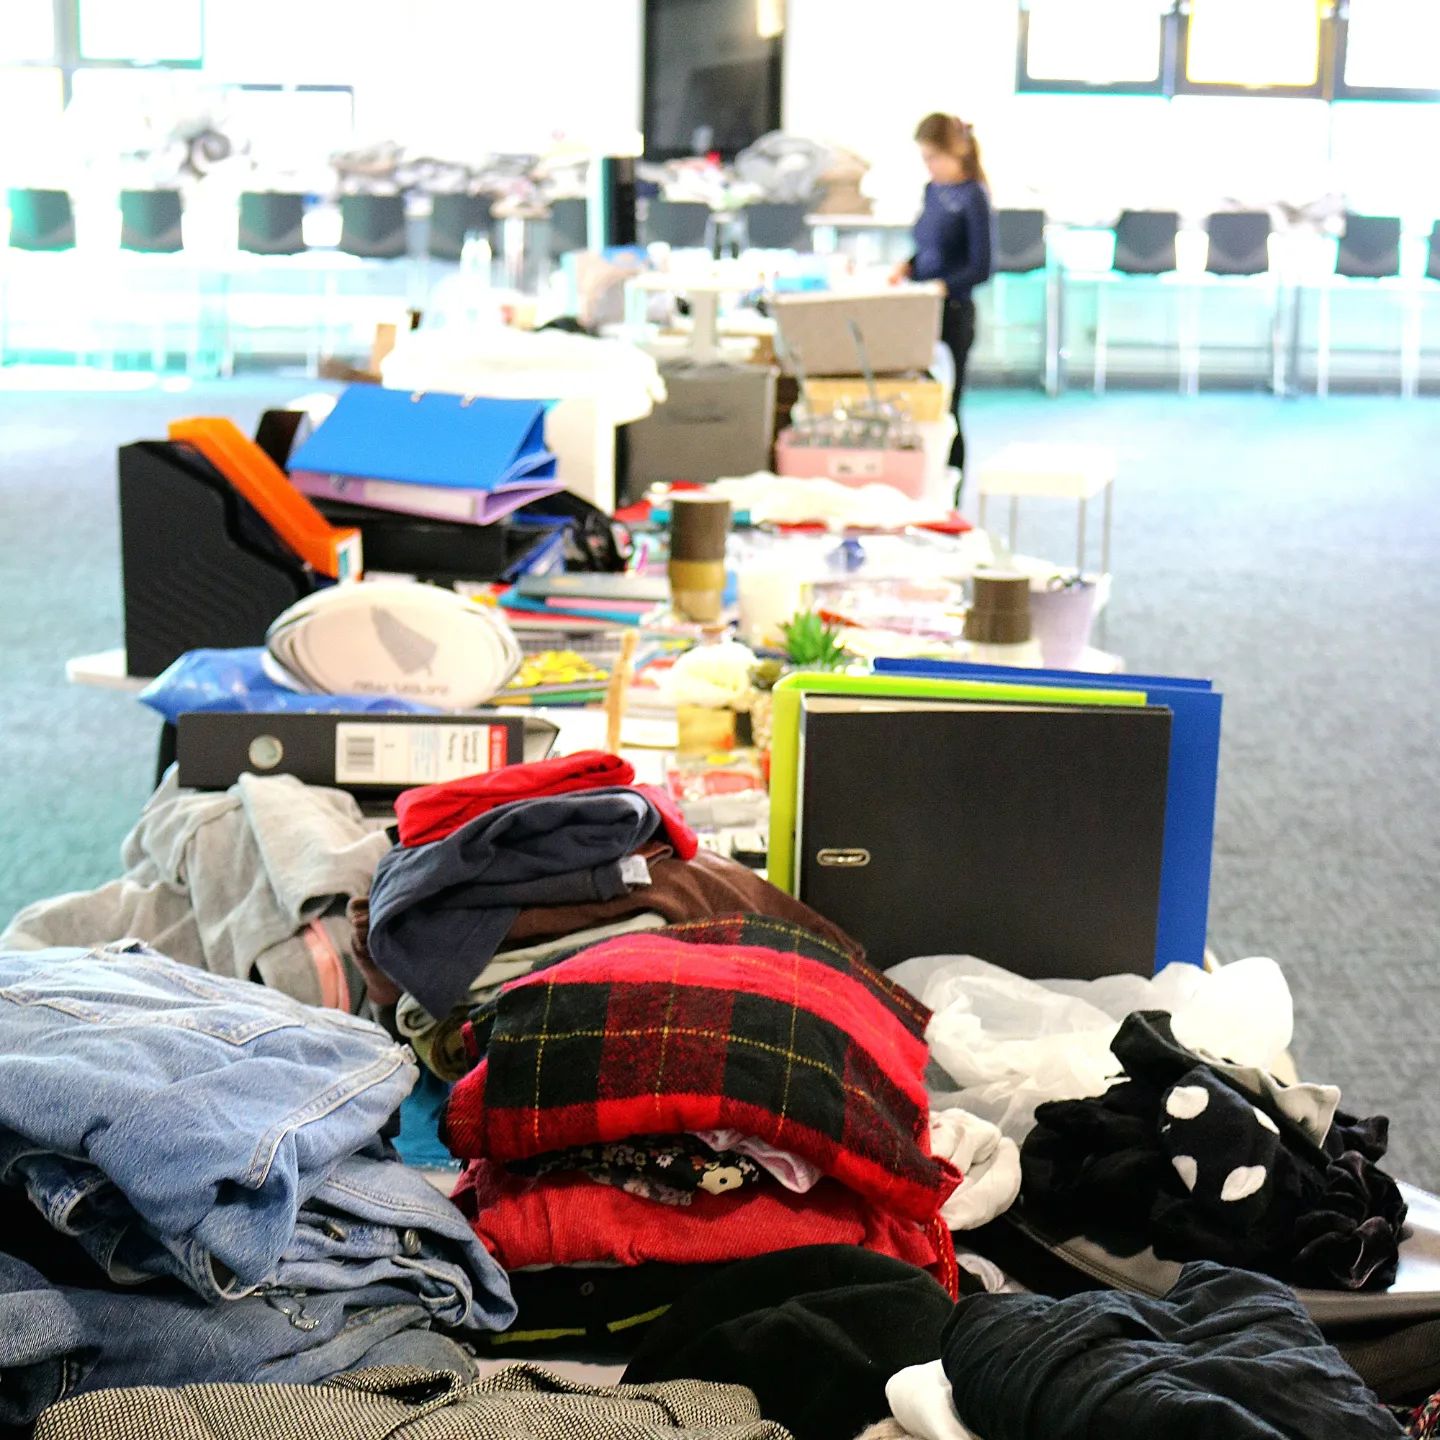 Clothes and stationary being given away for the Reuse Fair